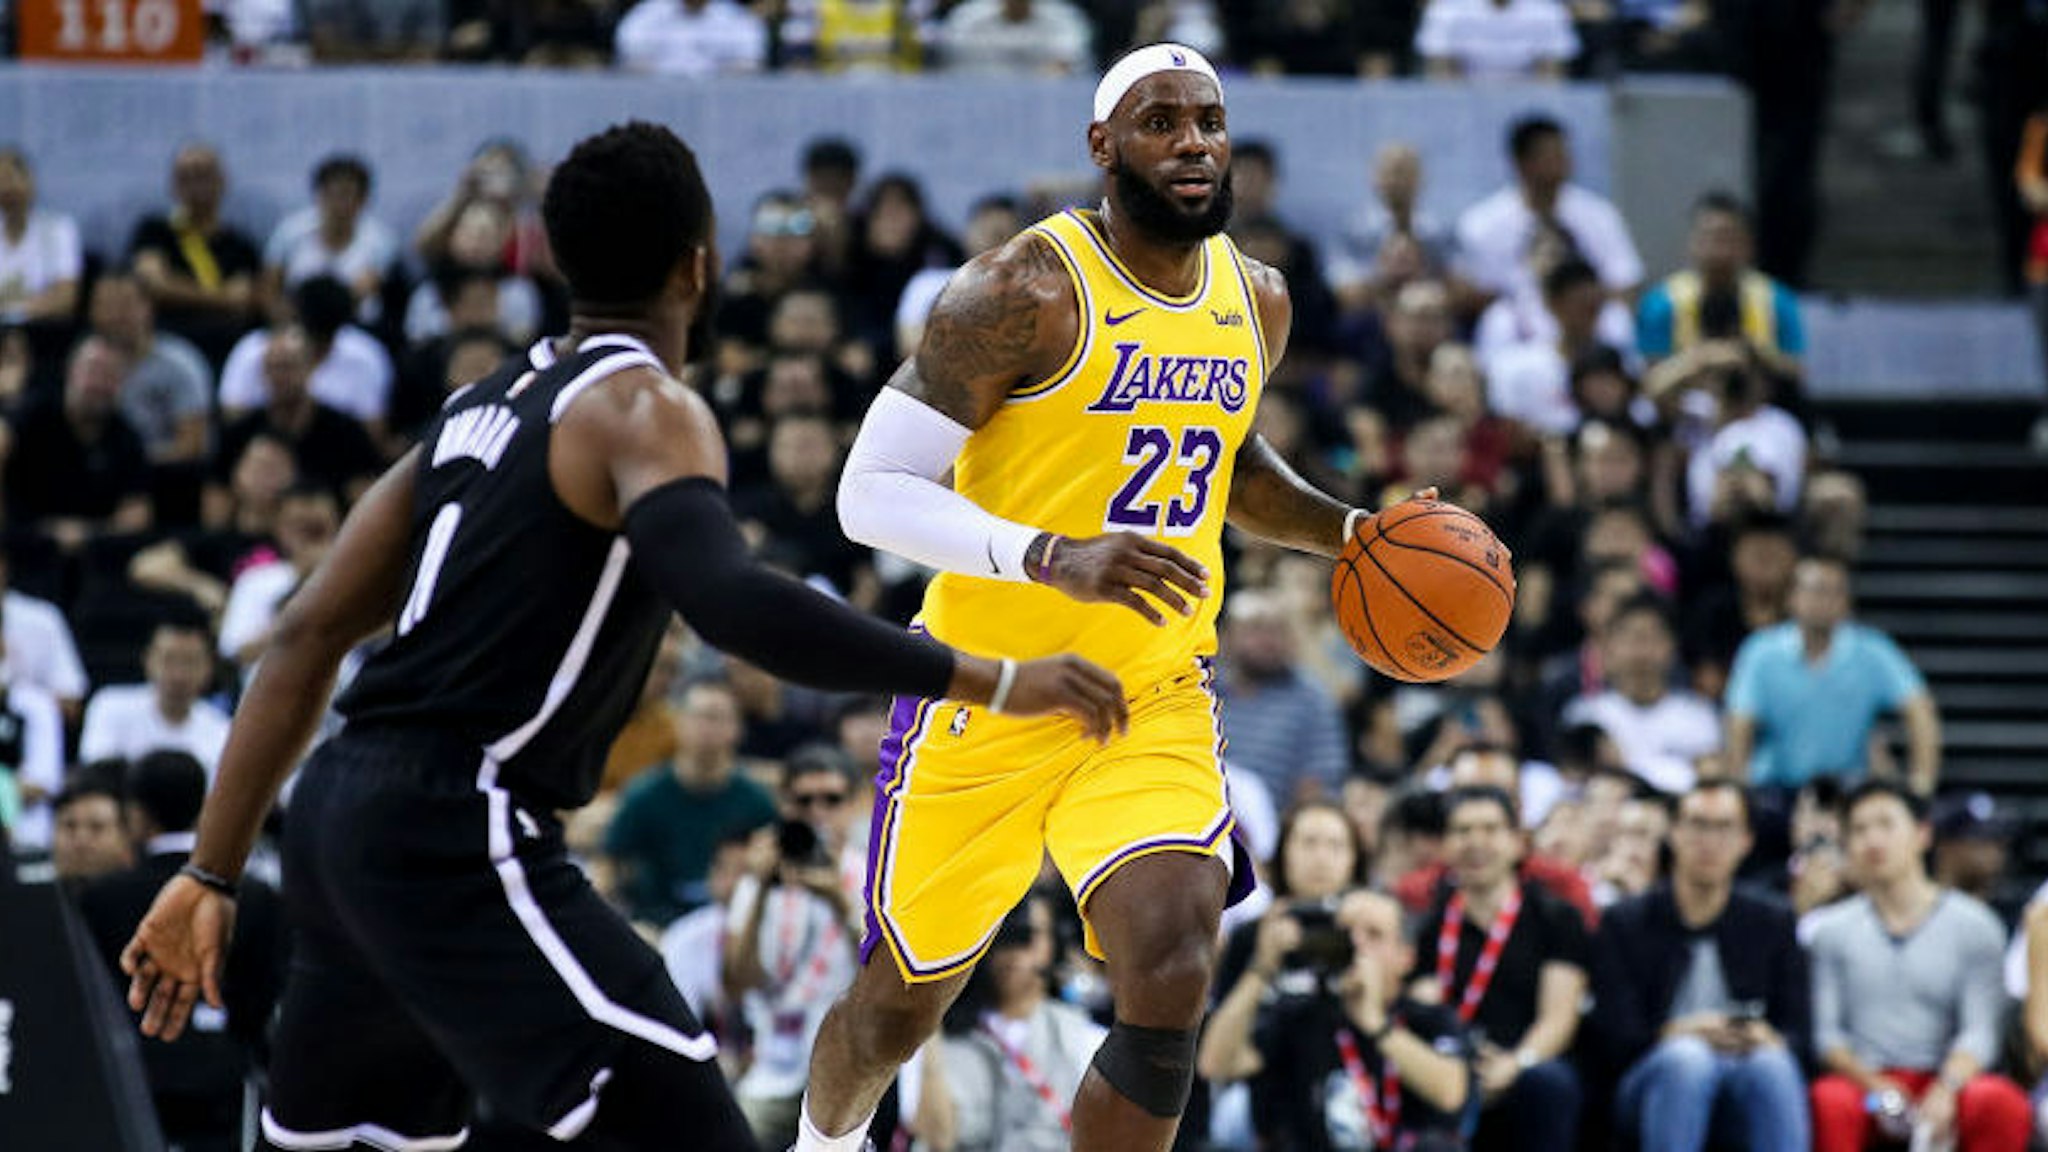 #23 LeBron James of Los Angeles Lakers drives the ball during NBA China Games 2019 between Los Angeles Lakers and Brooklyn Nets at Shenzhen Universiade Center on October 12, 2019 in Shenzhen, China. NOTE TO USER: User expressly acknowledges and agrees that, by downloading and/or using this photograph, user is consenting to the terms and conditions of the Getty Images License Agreement. (Photo by Zhizhao Wu/Getty Images)